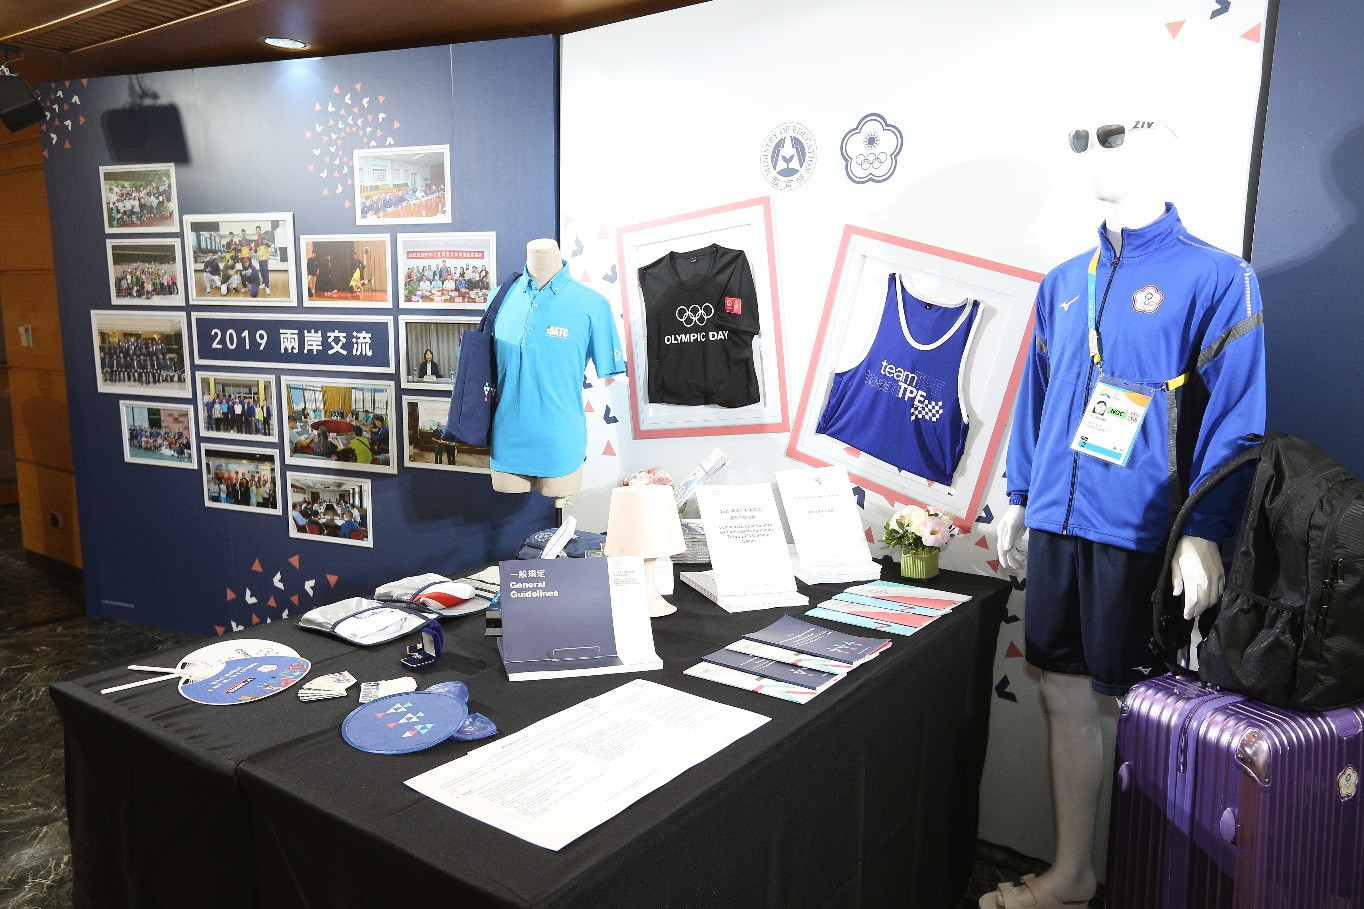 The Chinese Taipei Olympic Committee has held an exhibition to mark some of its achievements during 2019 ©CTOC